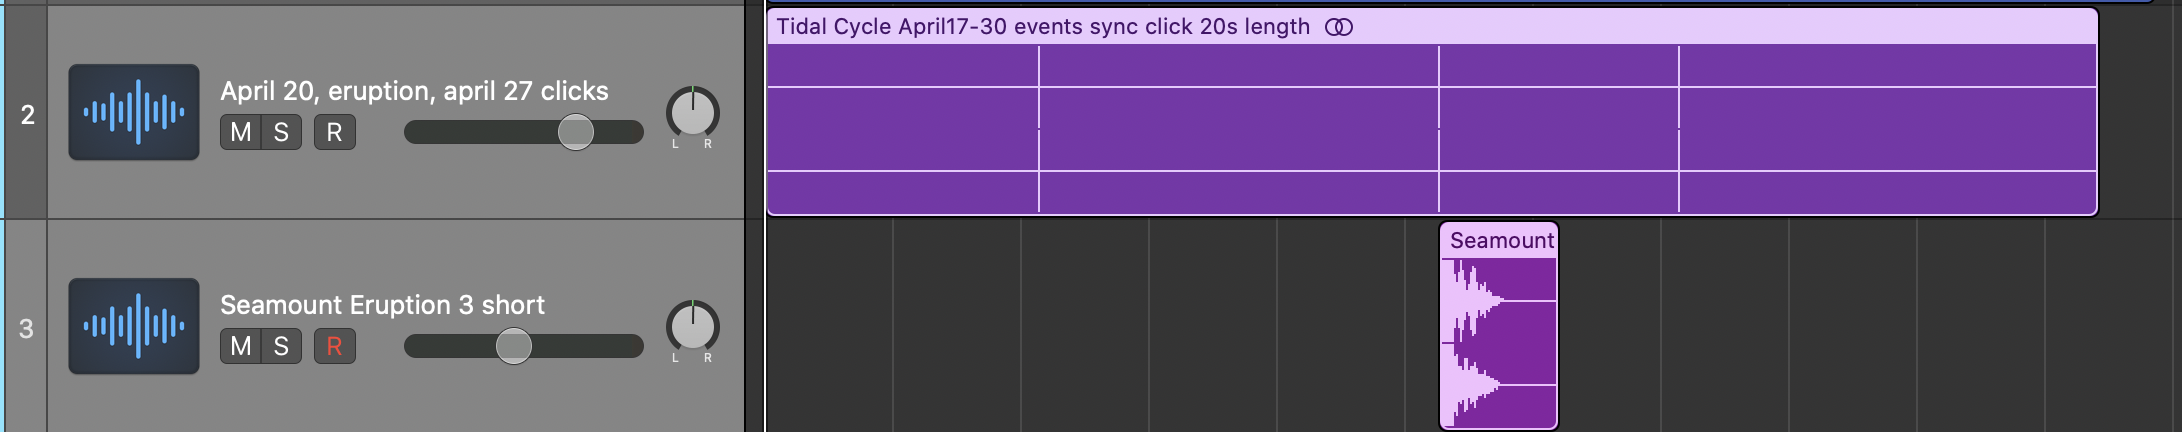 The image shows two audio tracks in Logic. The top track is a sonification click track with three event-based clicks across twenty seconds. The bottom track has a single audio region aligned to the middle click from the top track.